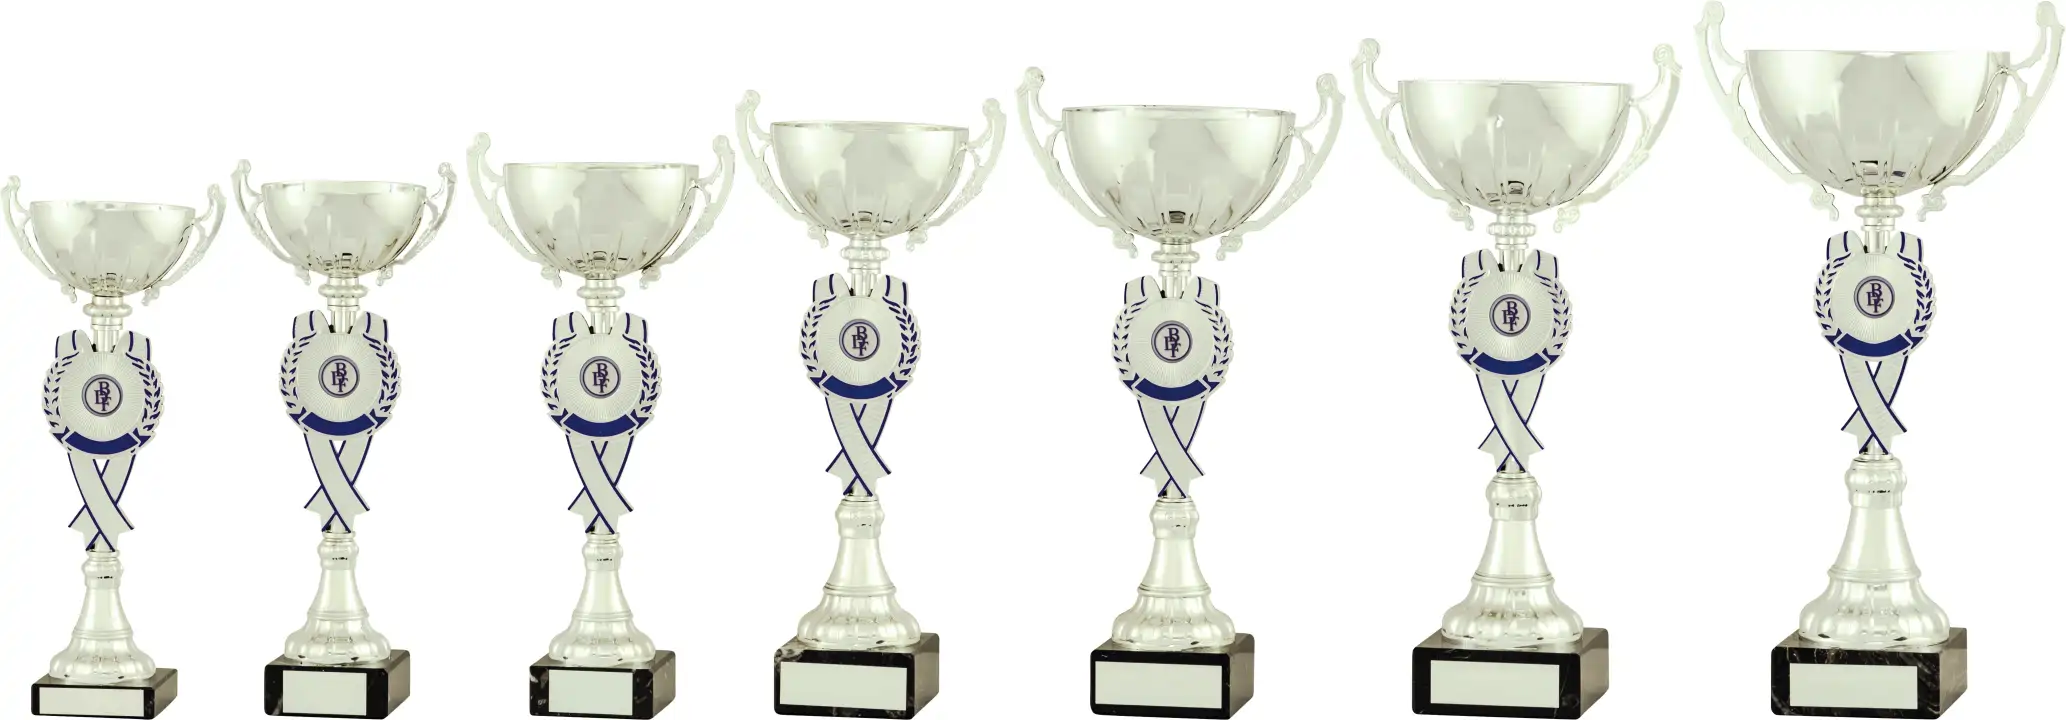 Silver Cup Trophies 2061 Series